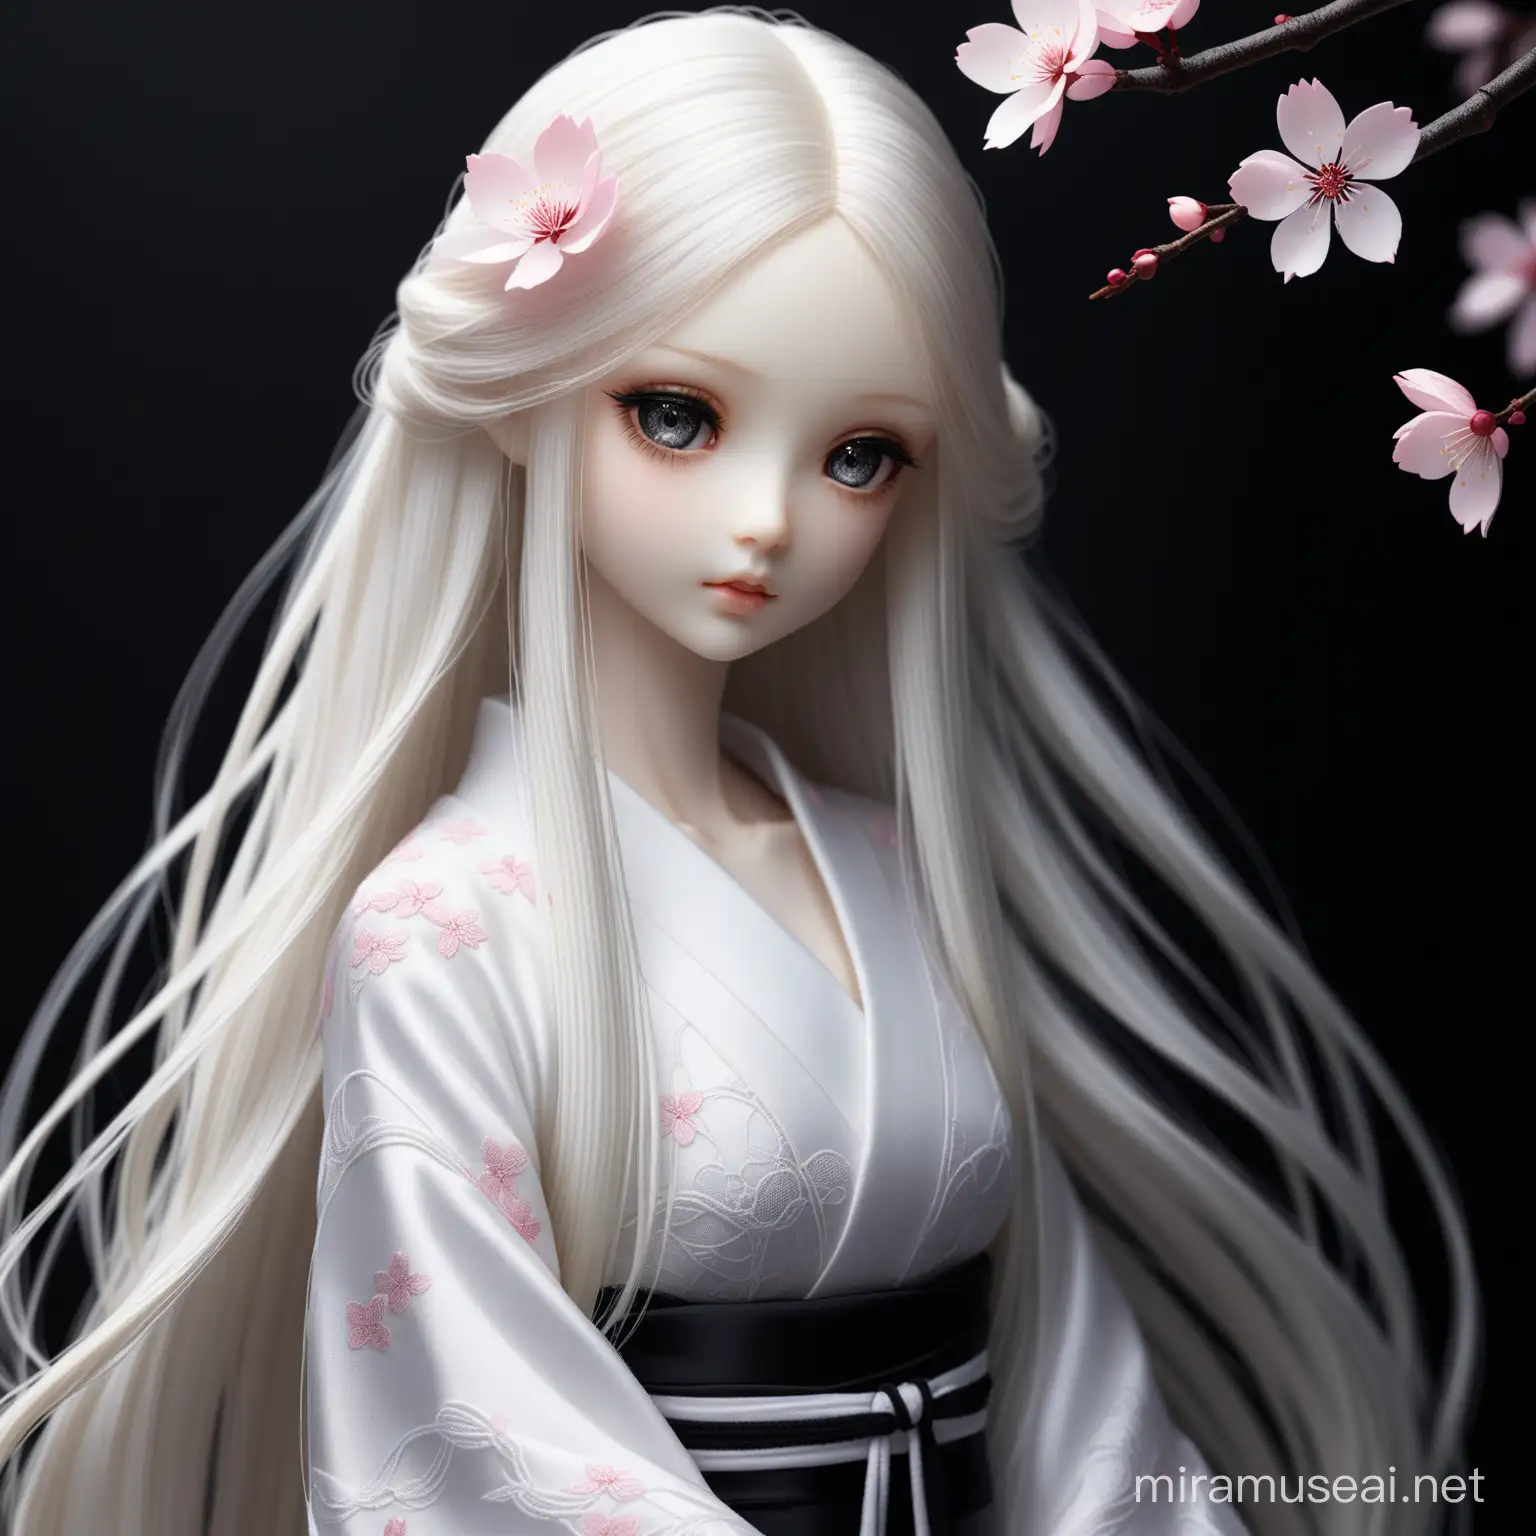 Hyperrealism Portrait of Jointed BJD Doll with Platinum Hair and Sakura Branch